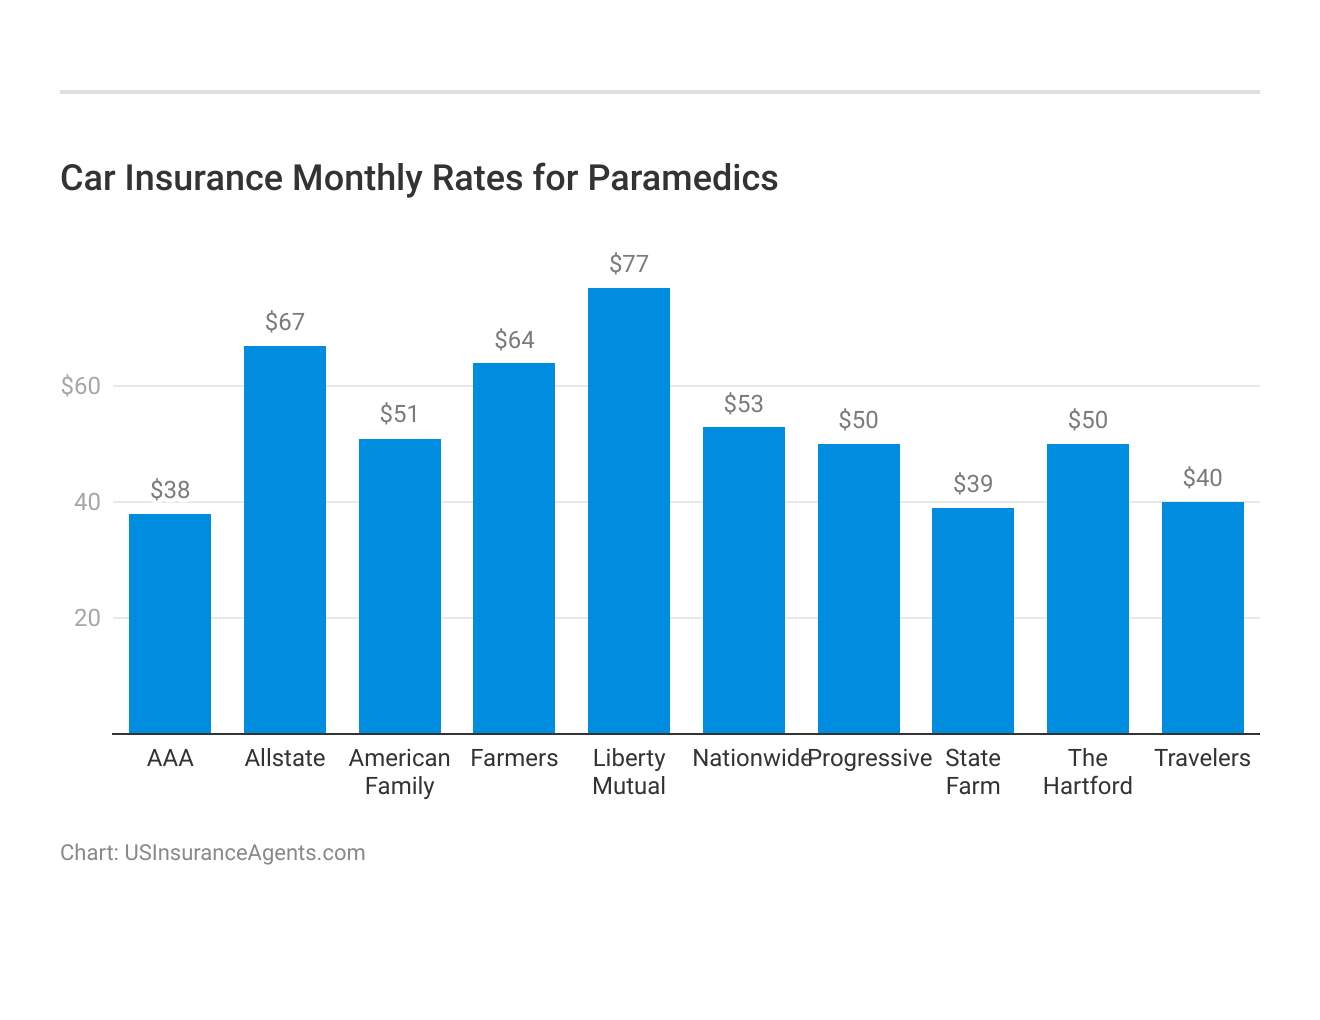 <h3>Car Insurance Monthly Rates for Paramedics</h3>